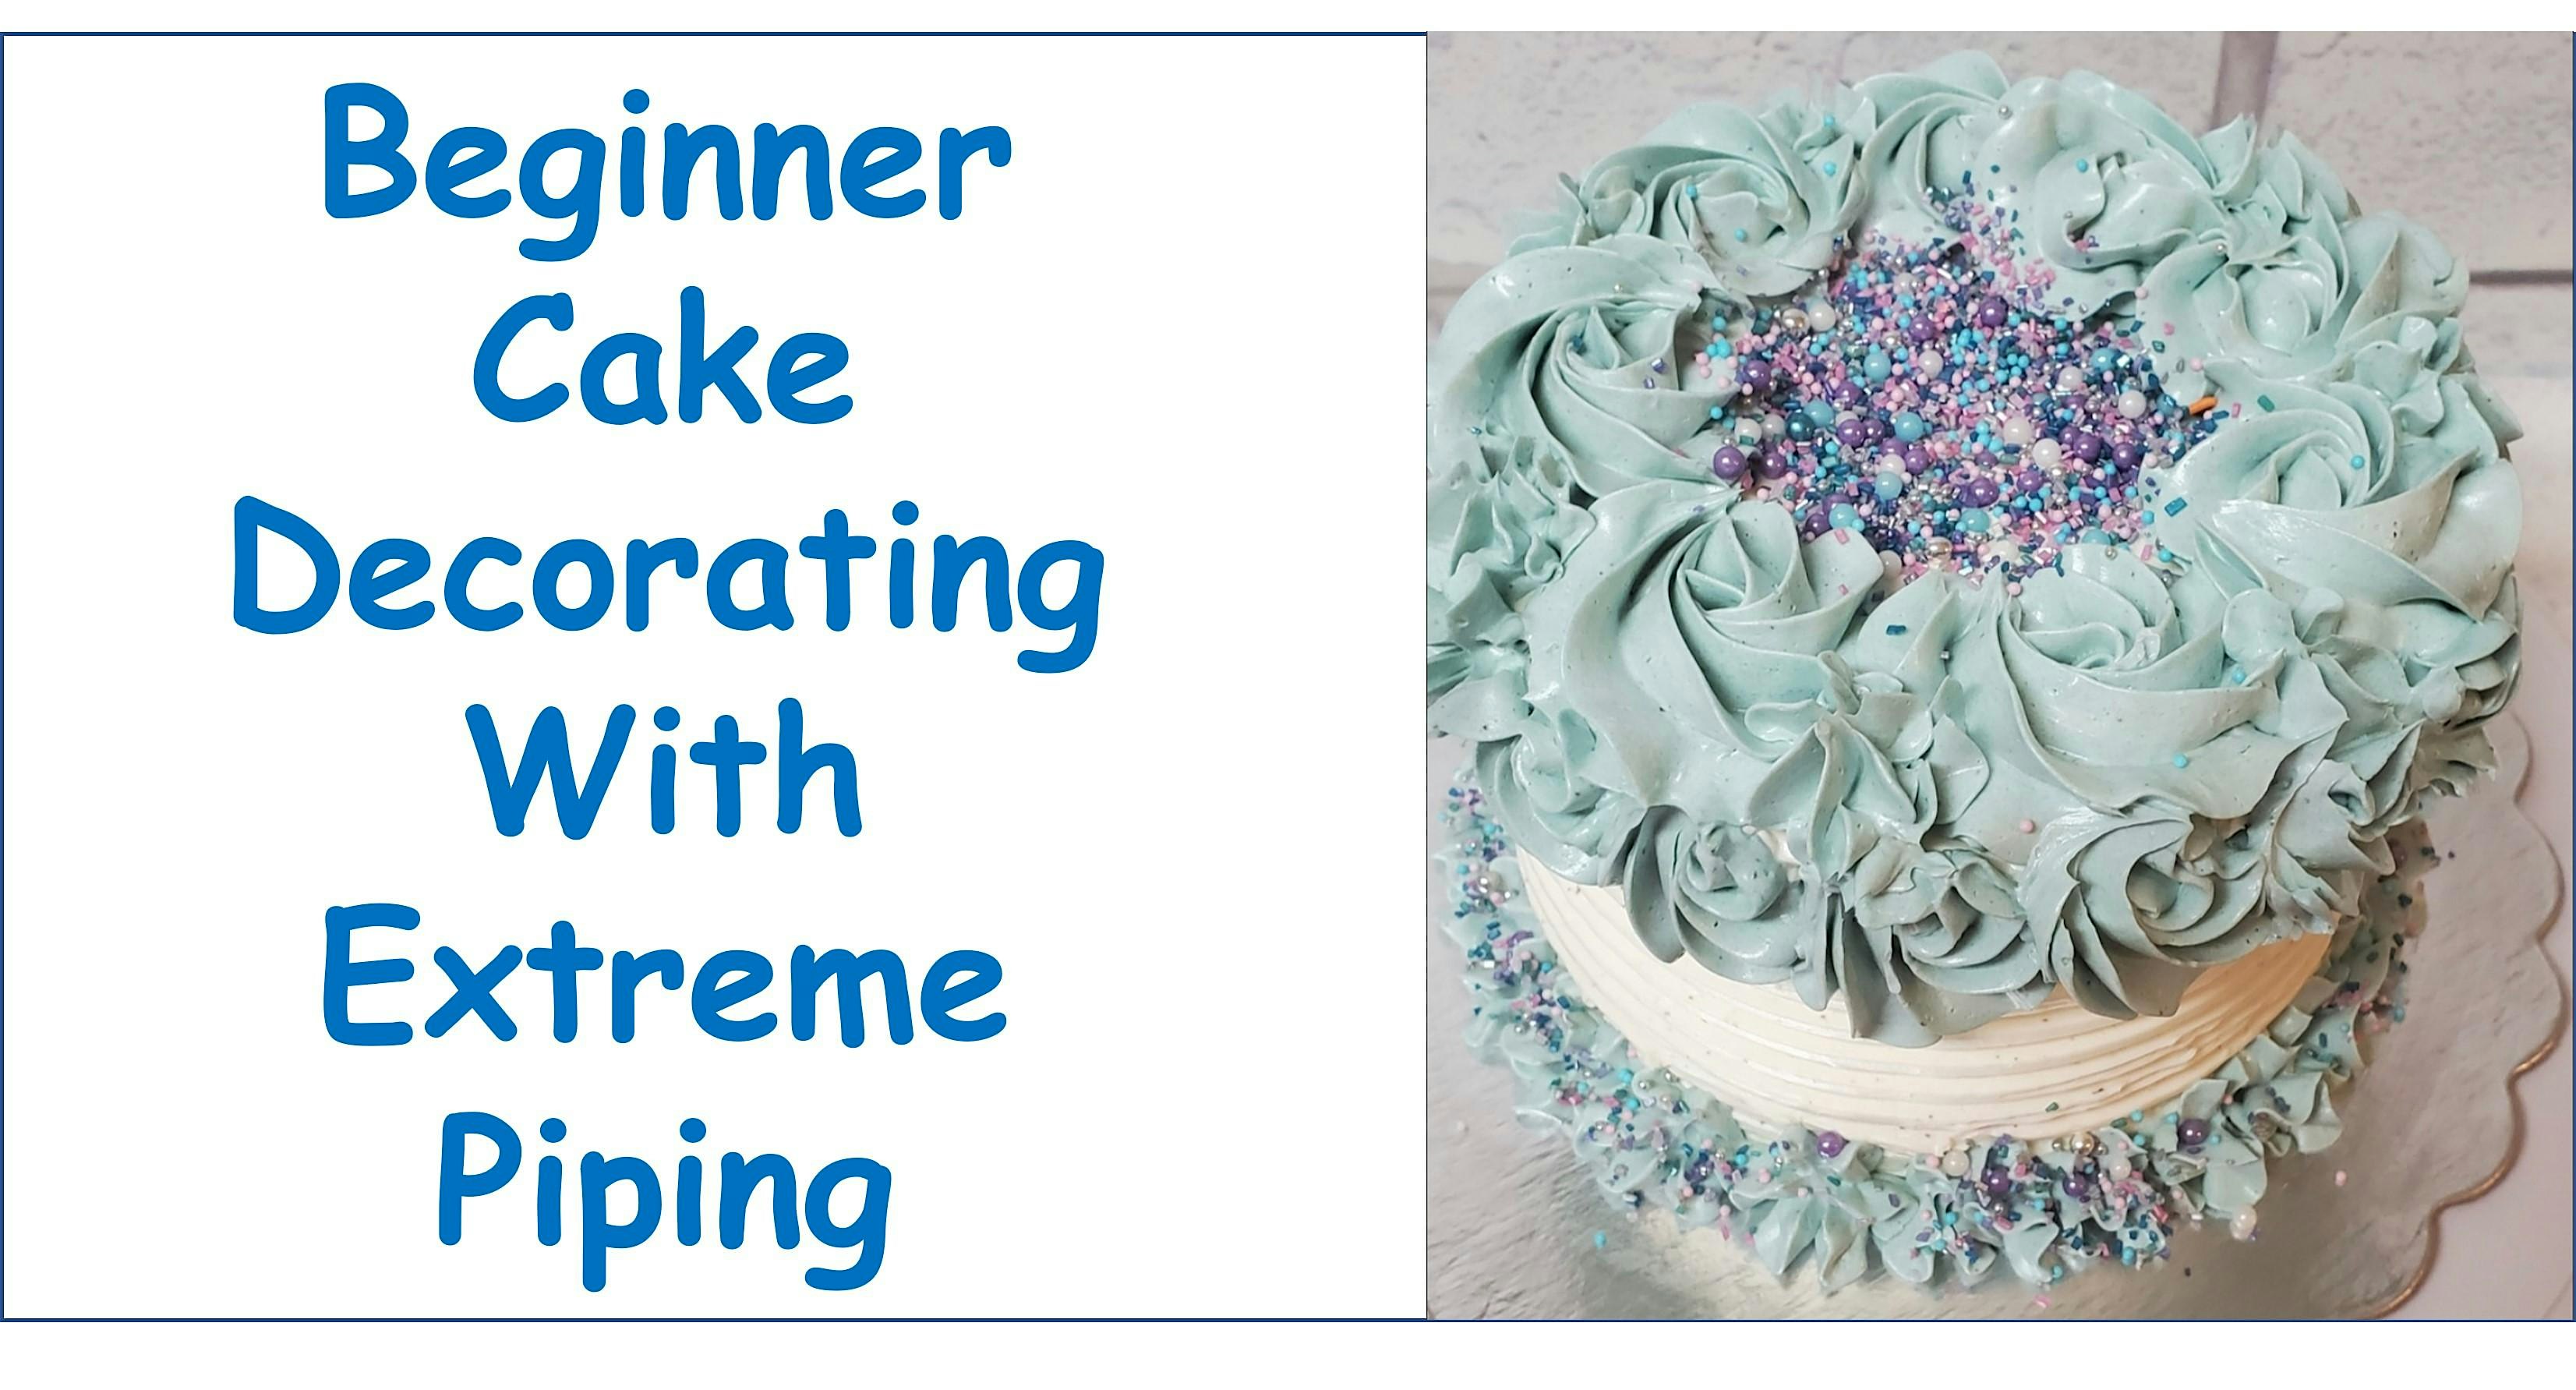 Beginner Cake Decorating with Extreme Piping